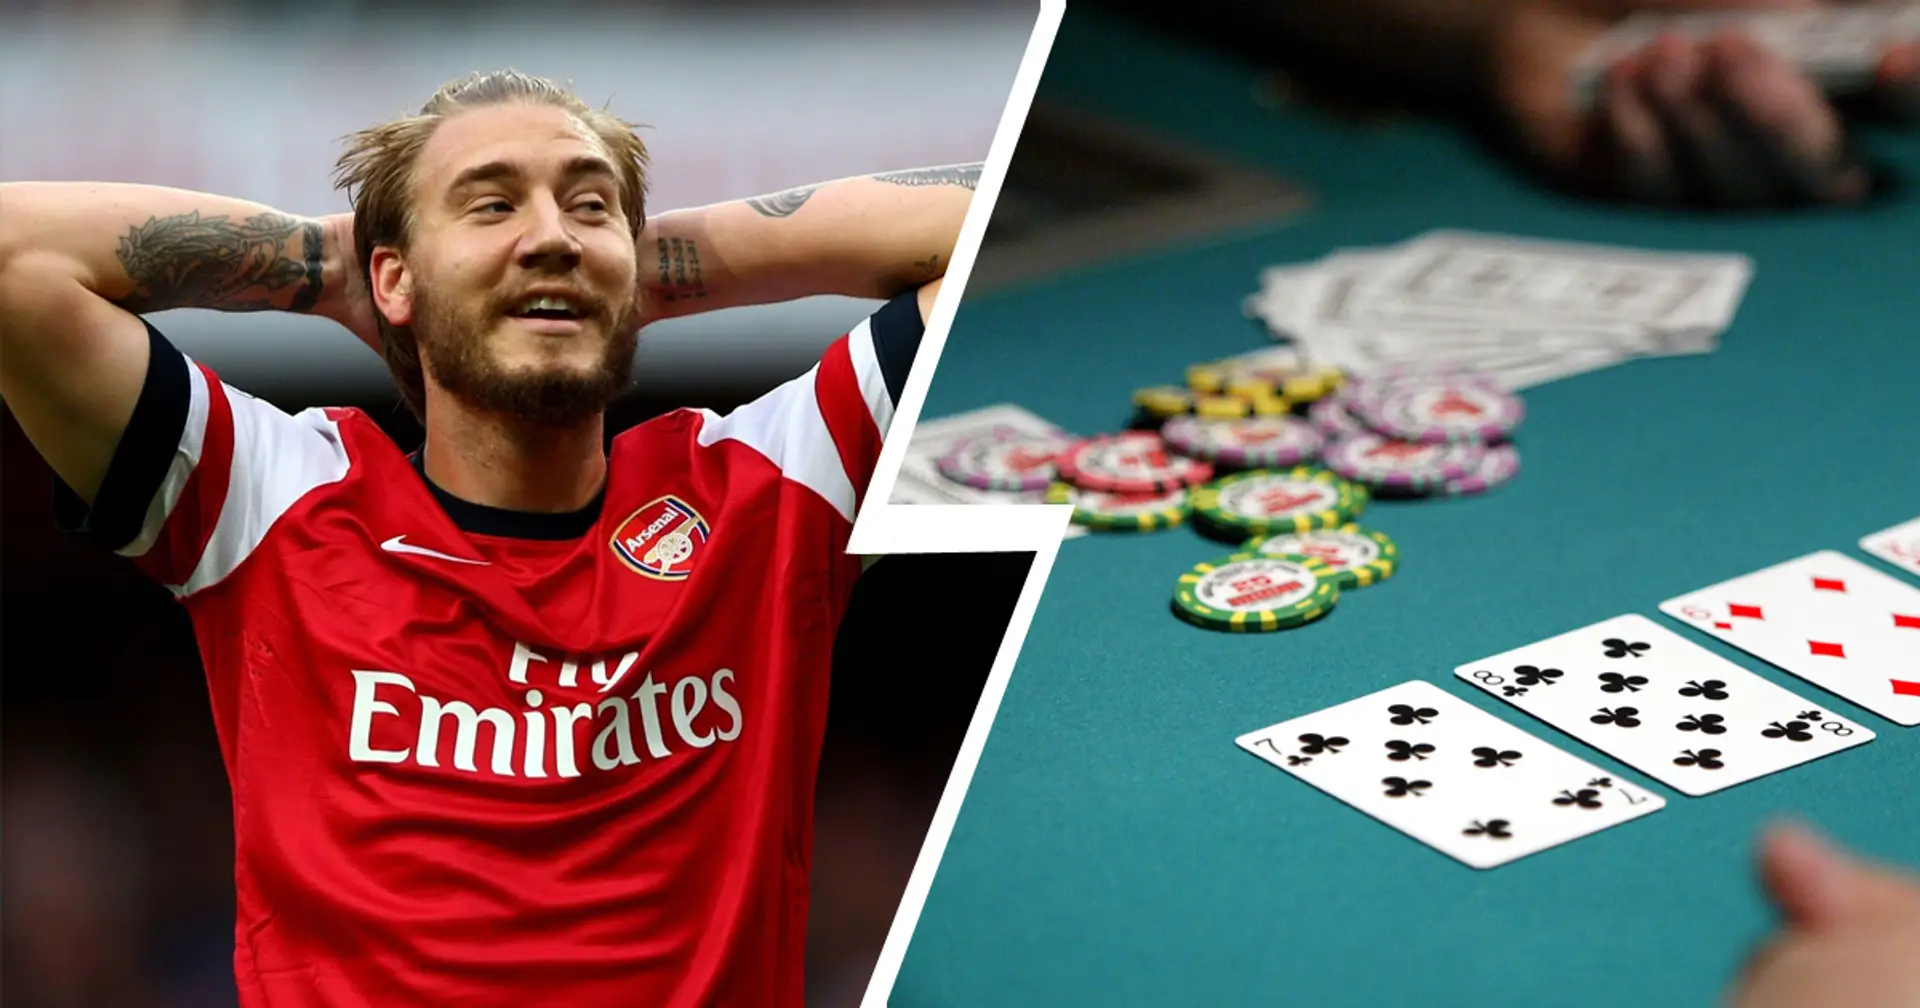 Nicklas Bendtner insists he was 'in control' of situation despite blowing £5.4m on Poker